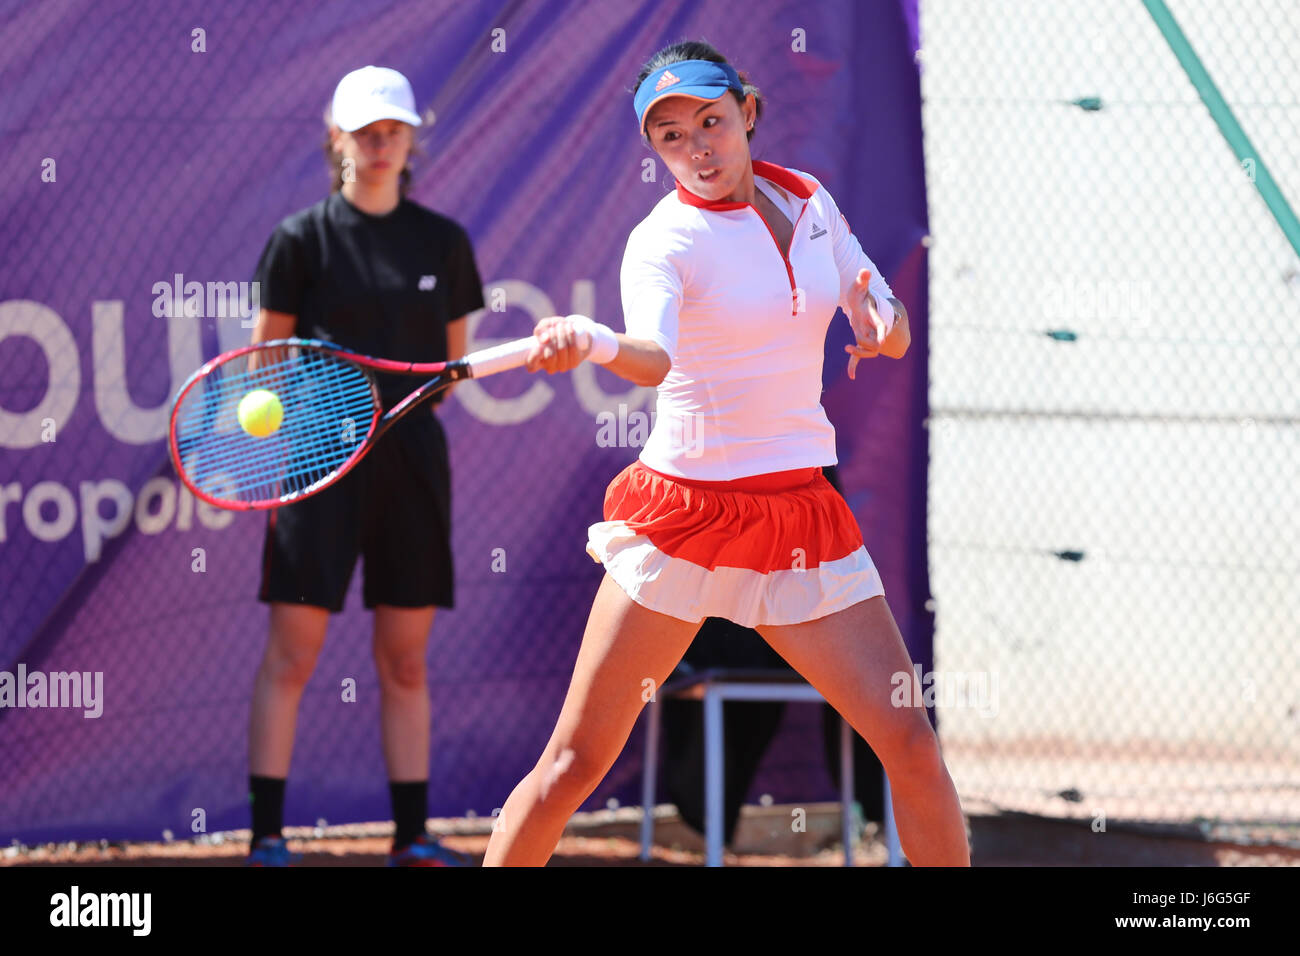 Strasbourg, France. 21st May, 2017. Chinese player Qiang Wang is in action during her match in the 1st round of the WTA tennis Internationaux of Strasbourg vs Japanese player Risa Ozaki on May 21, 2017 in Strasbourg, France - ©Yan Lerval/Alamy Live News Stock Photo